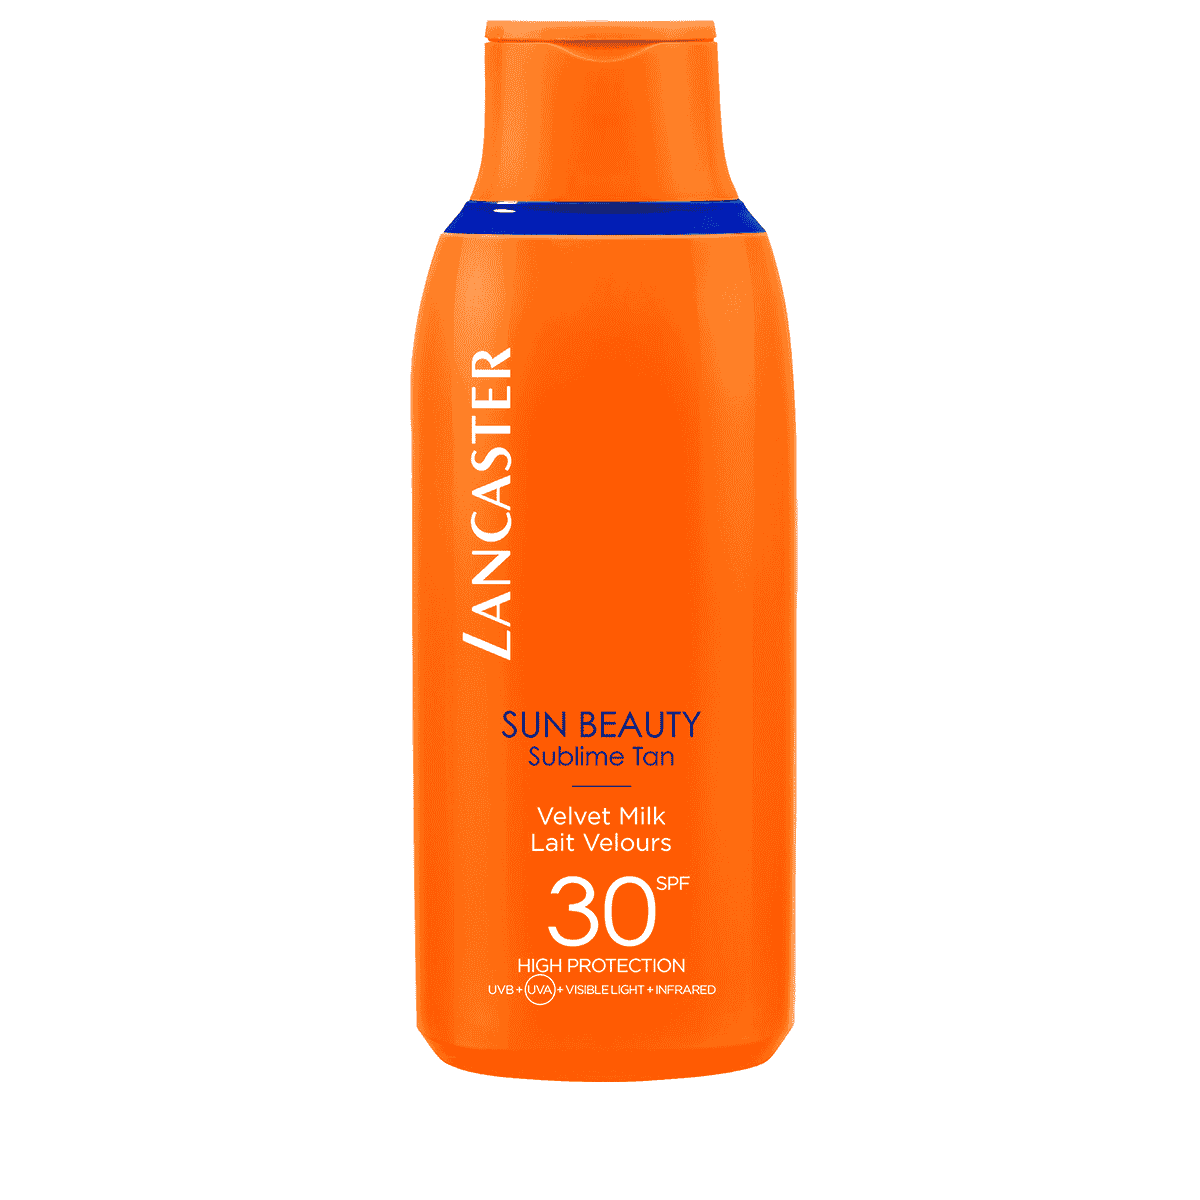 Lancaster Sun Beauty Sumblime Tan Spf 30 / 175 ml - Karout Online -Karout Online Shopping In lebanon - Karout Express Delivery 